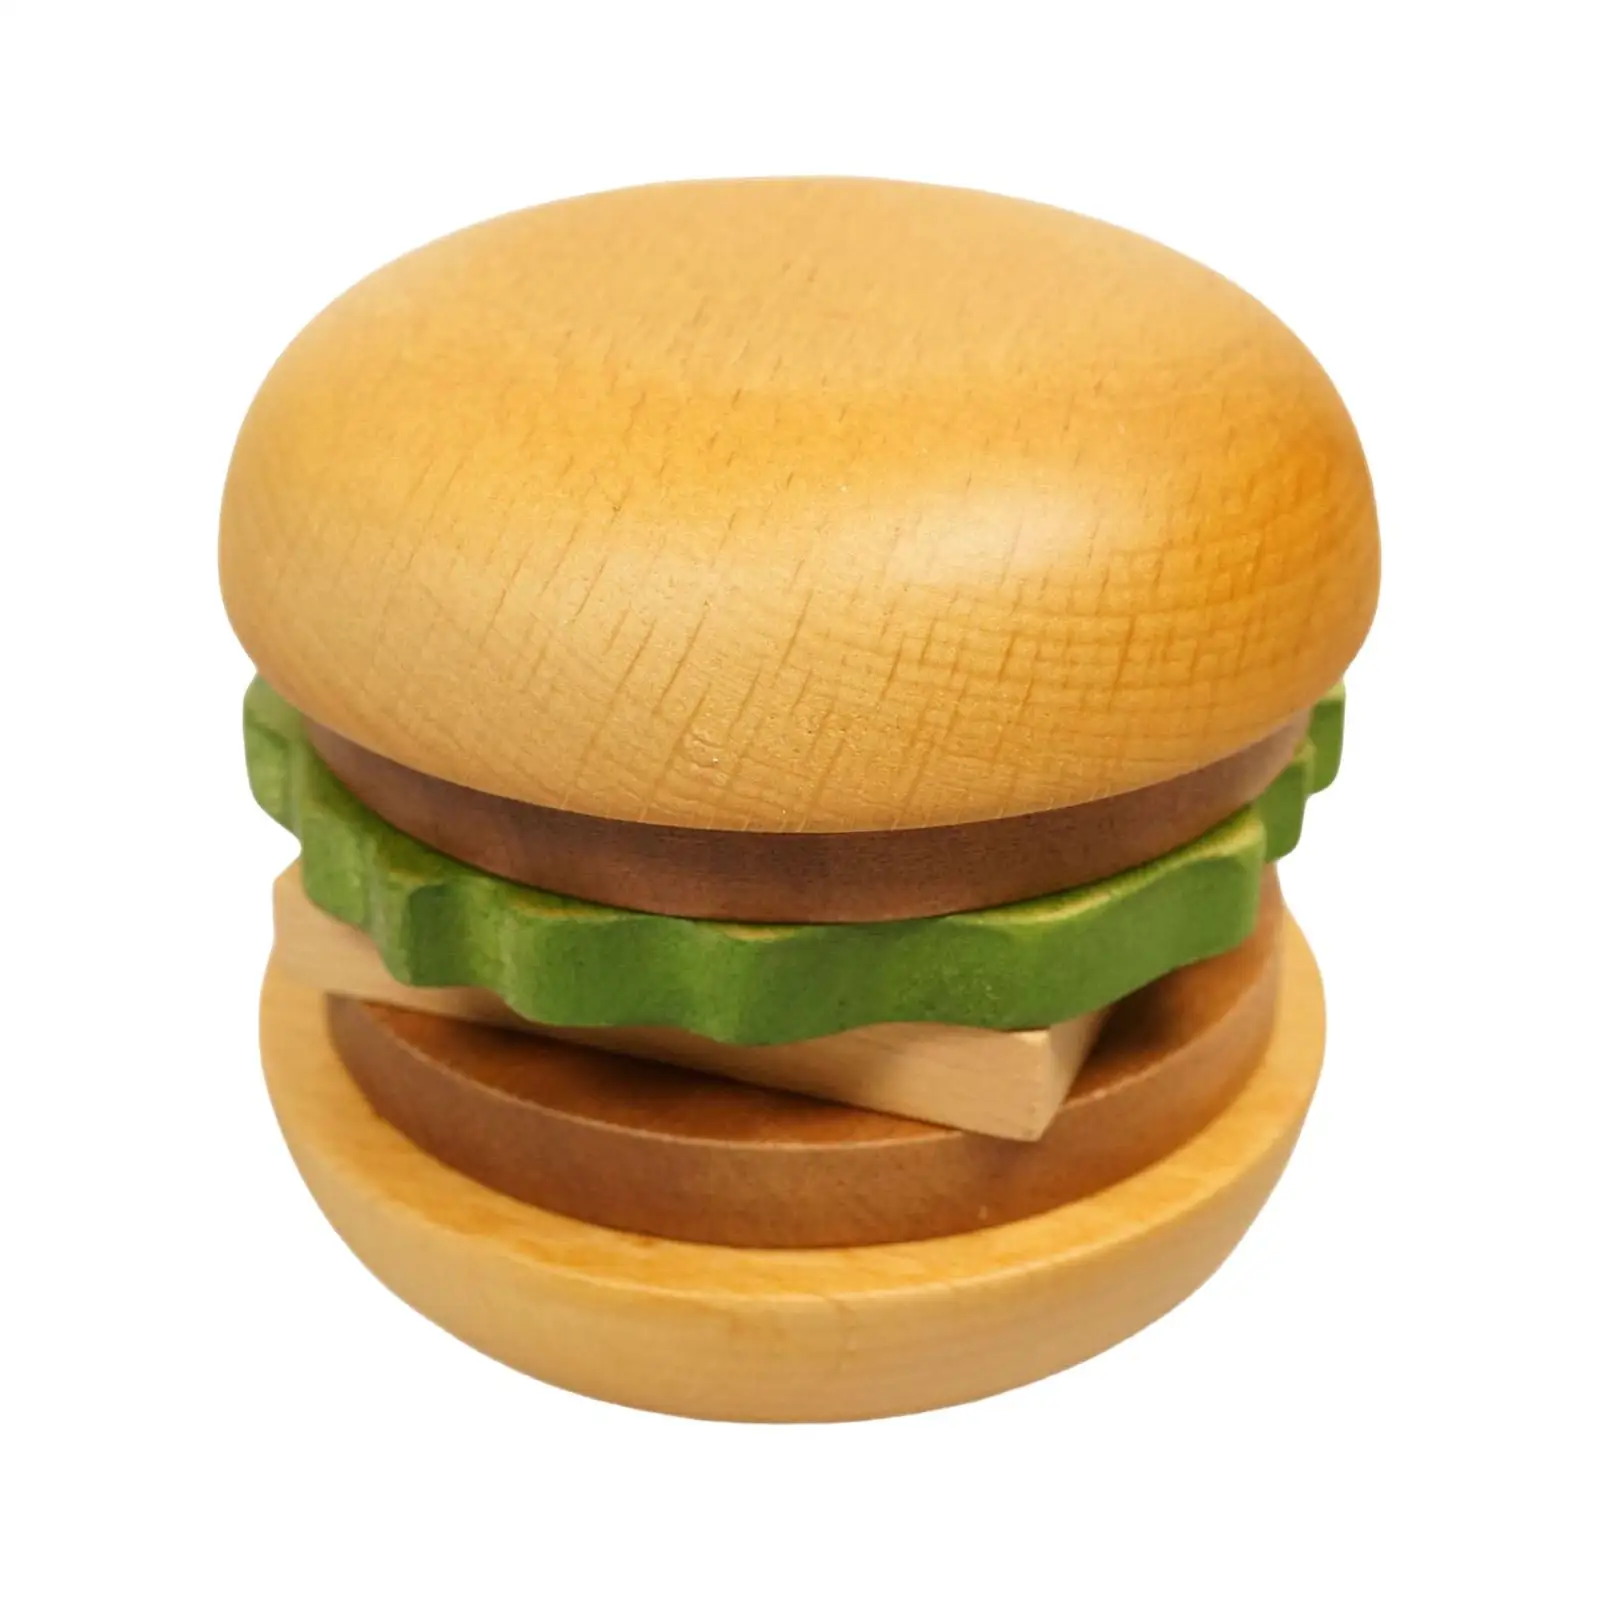 Portable Wooden Burger Set Heat Insulation Solid Smooth for Living Room Dinner Table Office Home Photography Props